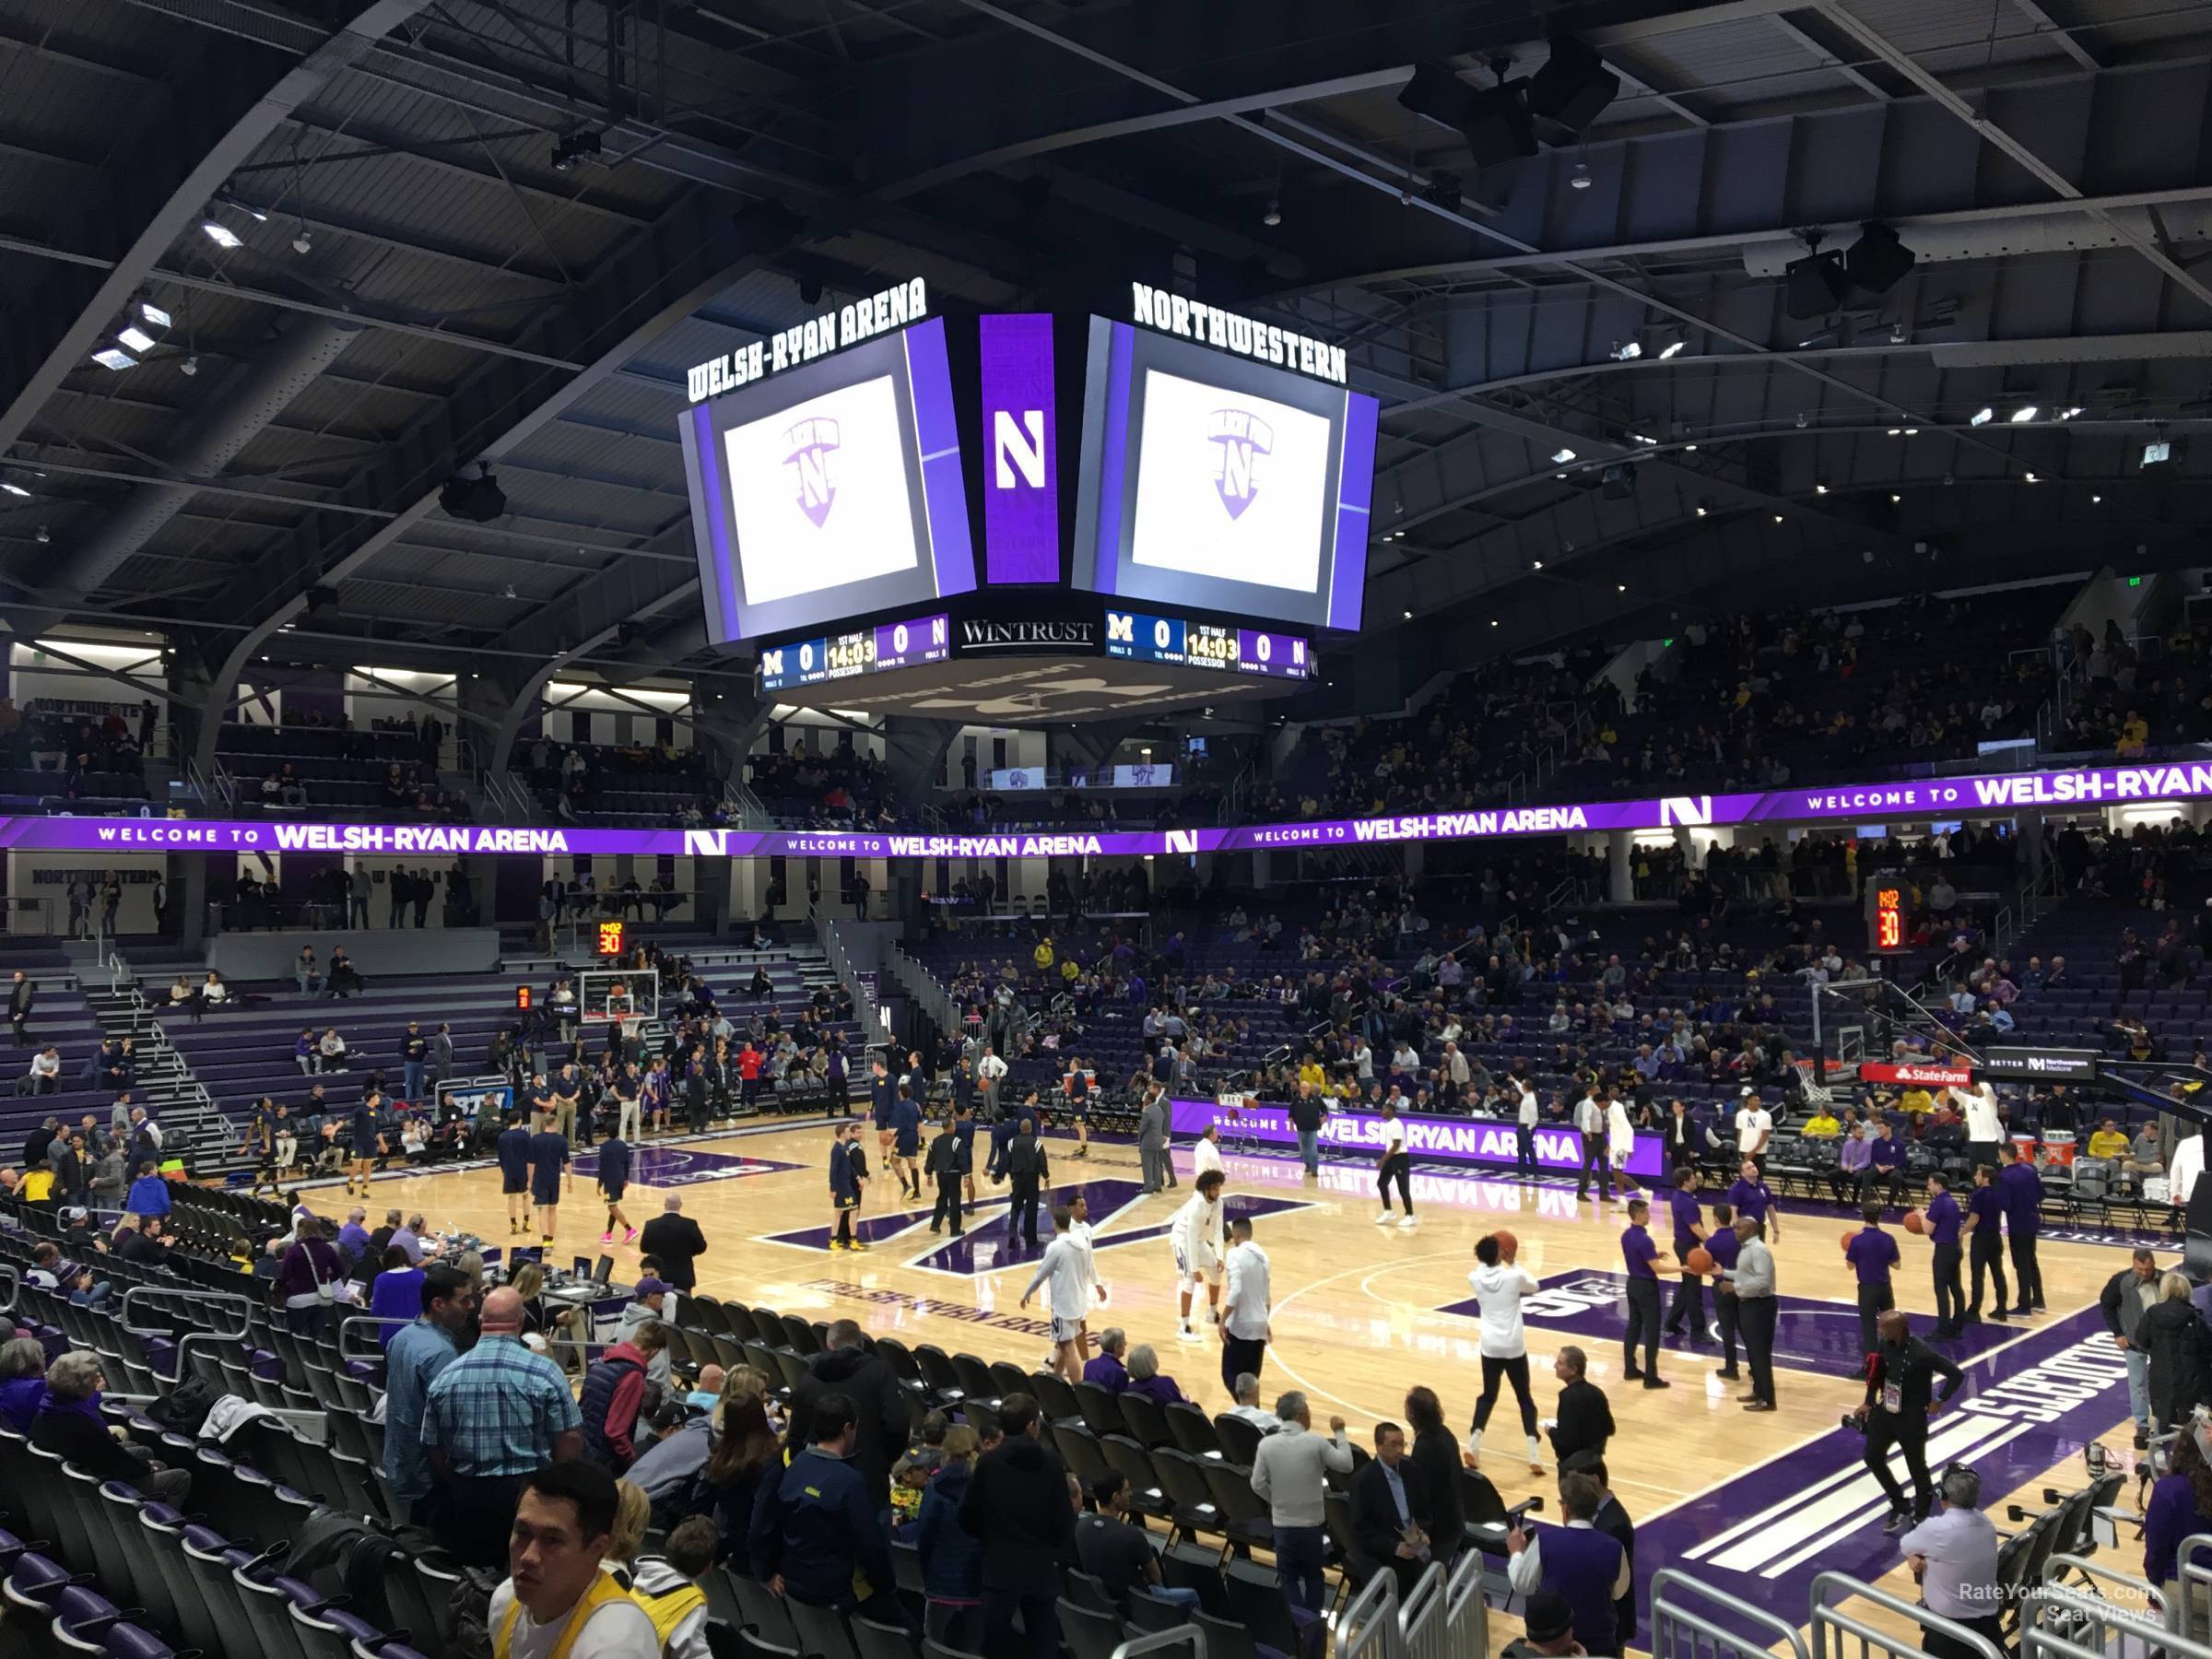 section 114, row 12 seat view  - welsh-ryan arena